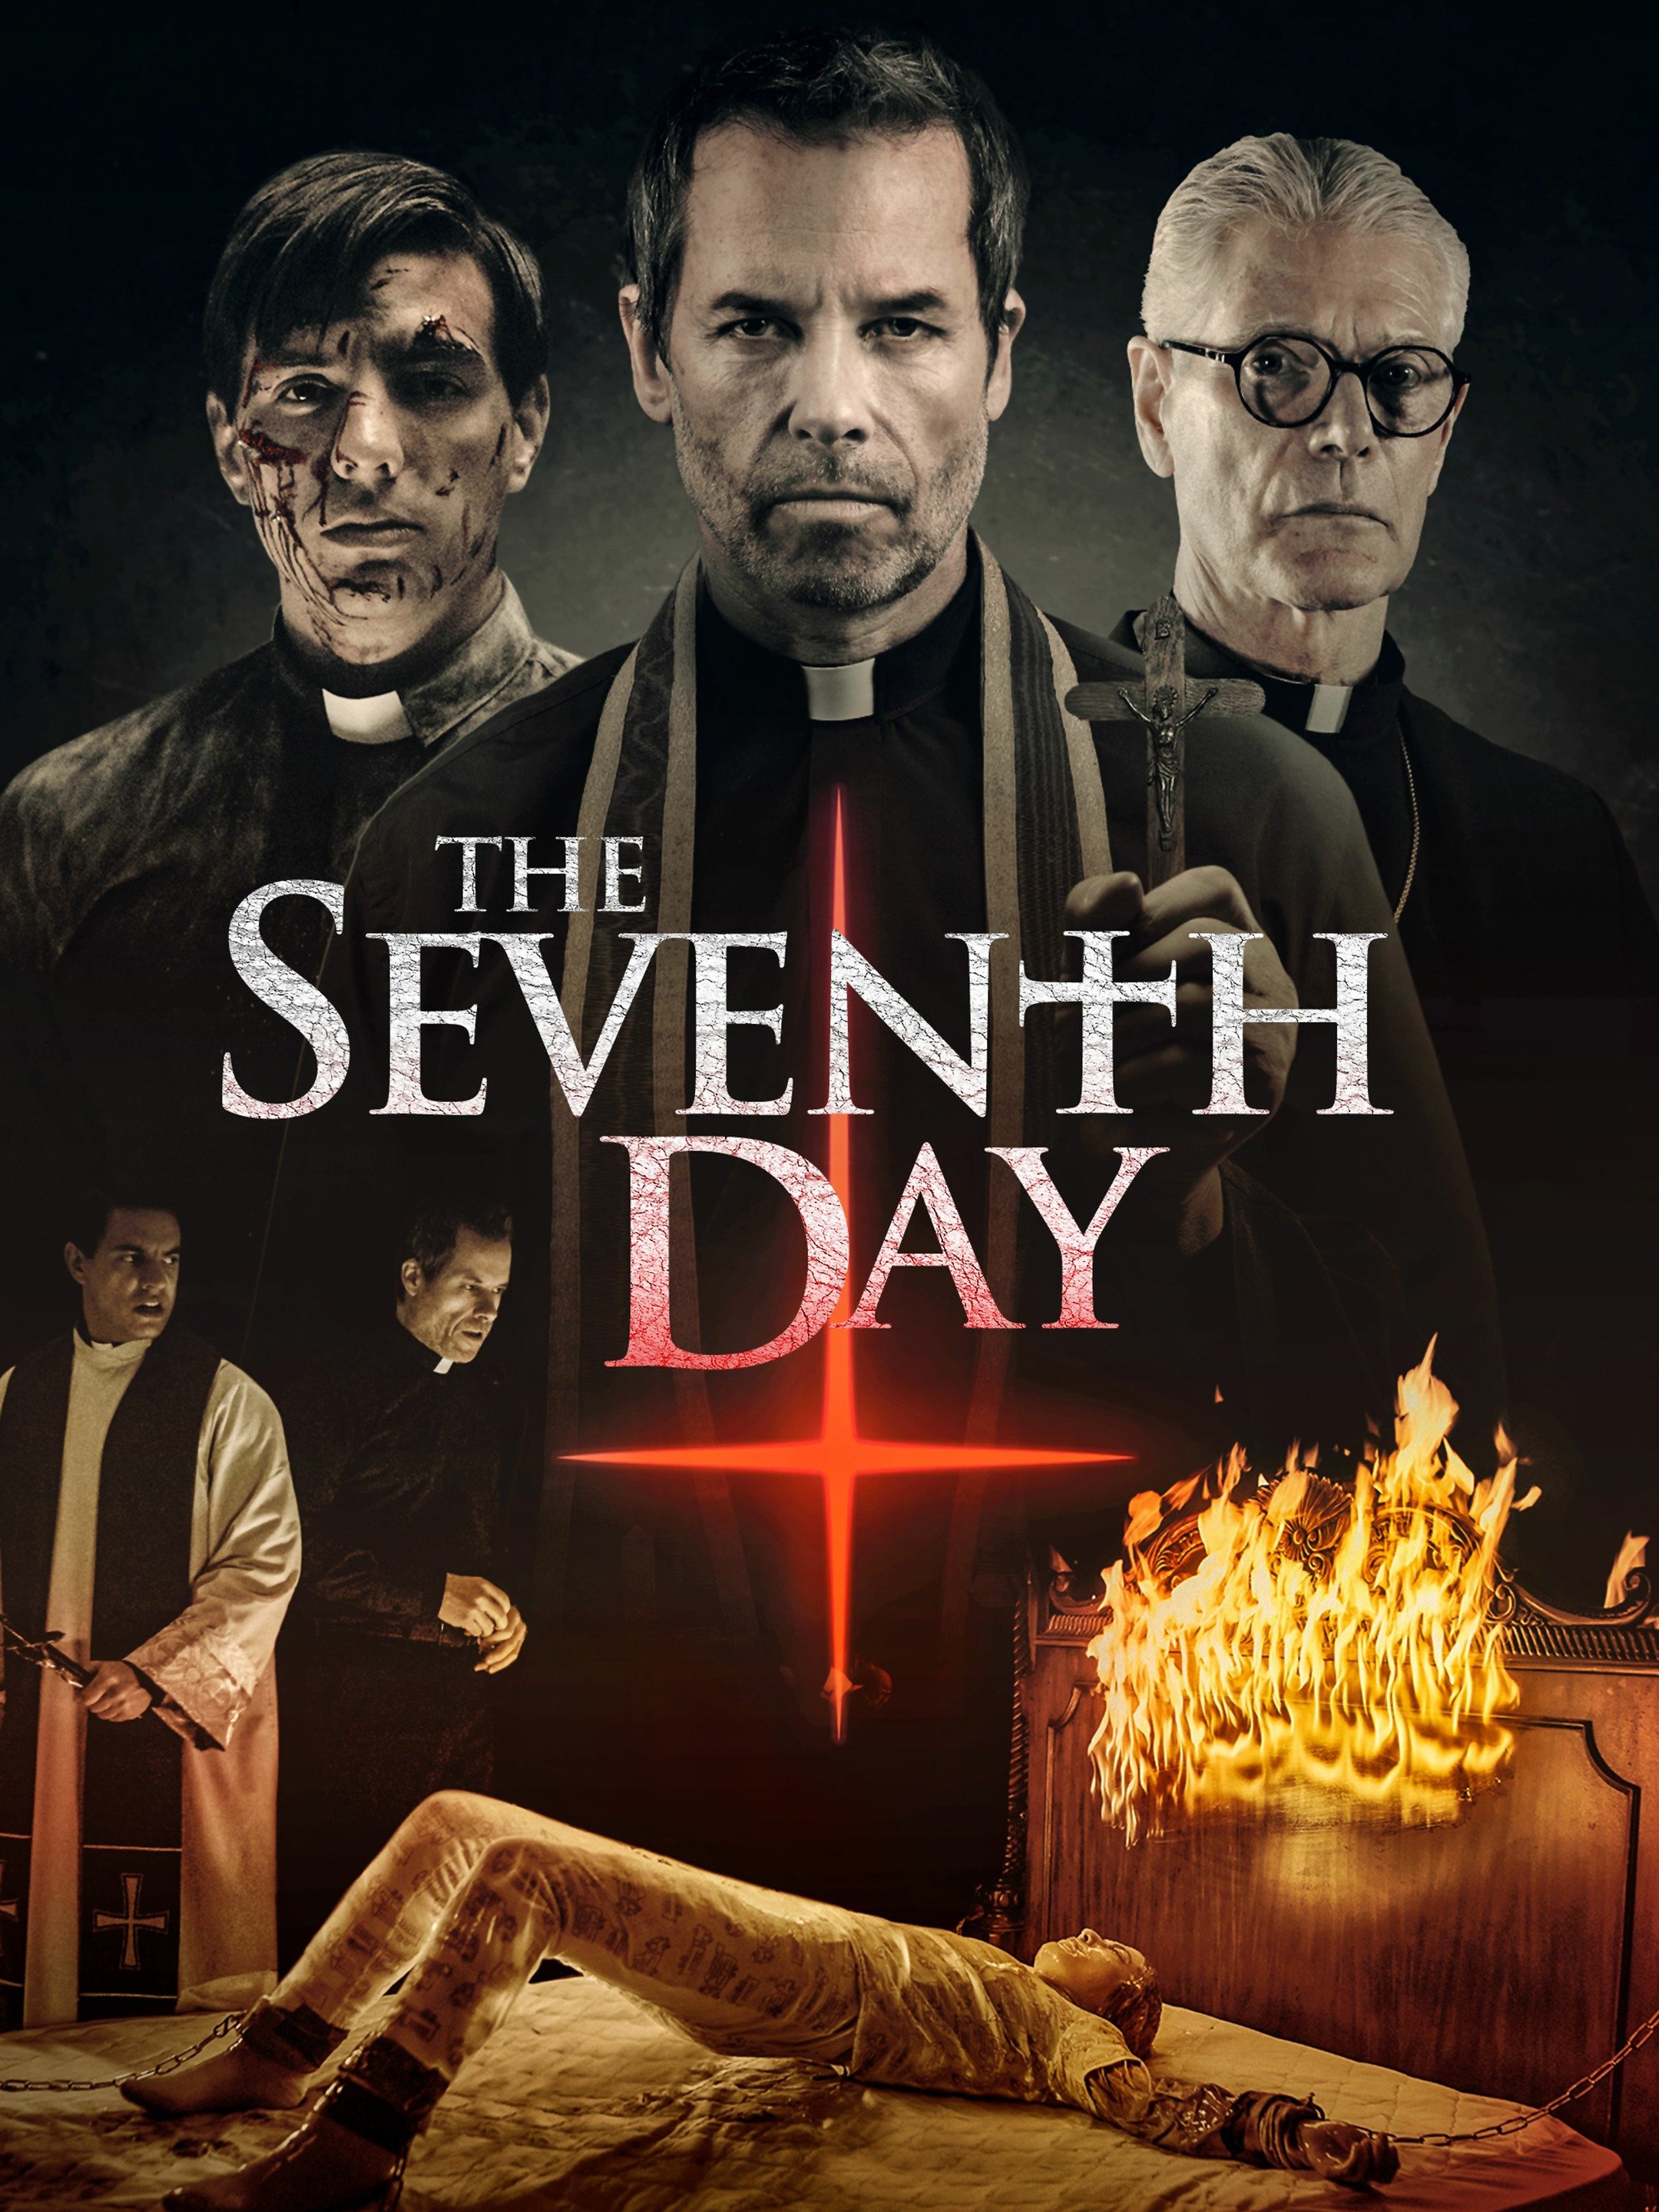 The Seventh Day: Trailer 1 - Trailers & Videos - Rotten Tomatoes